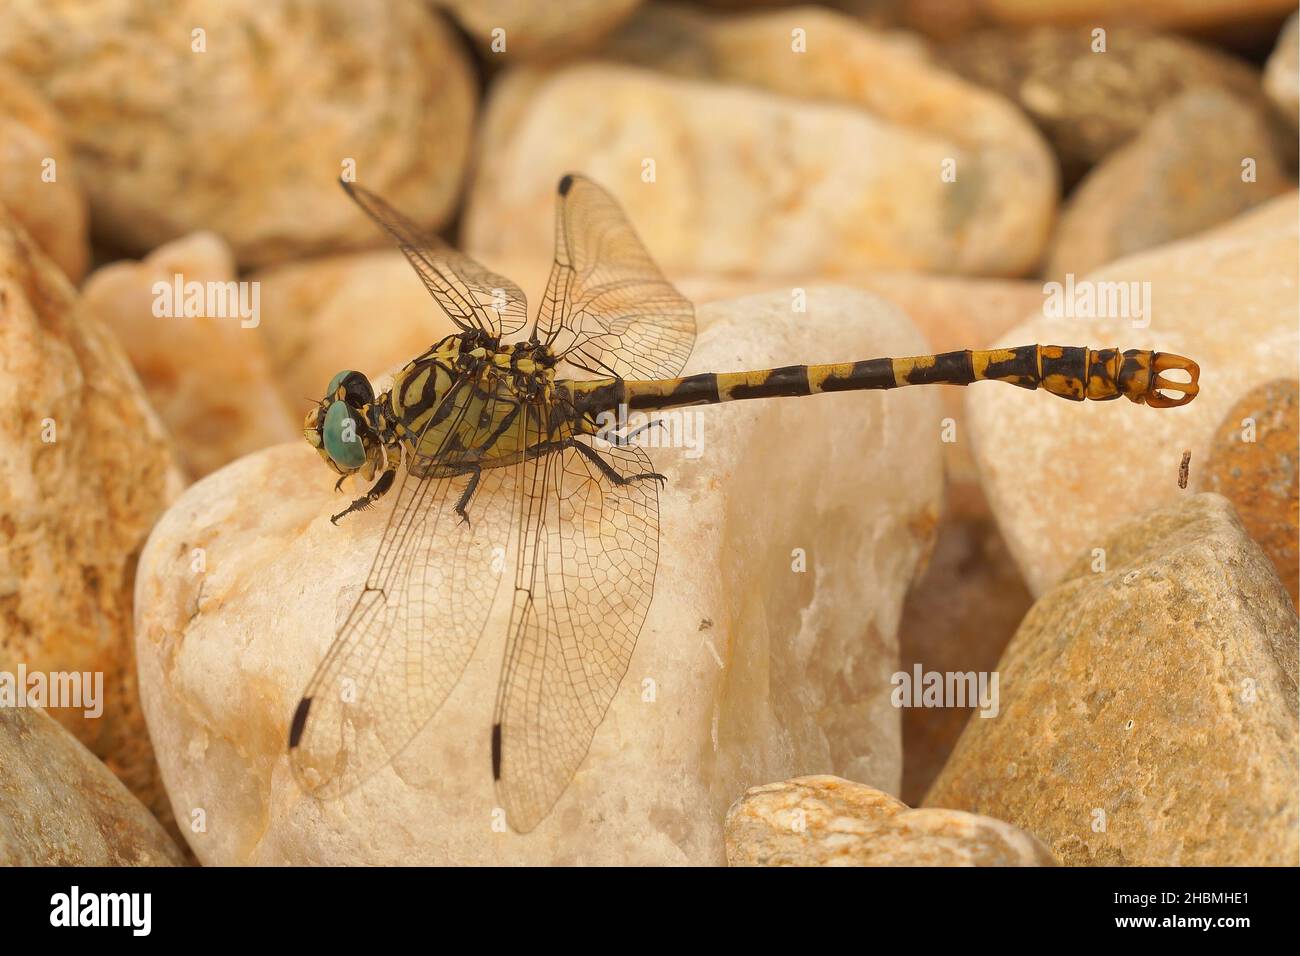 The green-eyed hook-tailed dragonfly, Onychogomphus forcipatus Stock Photo